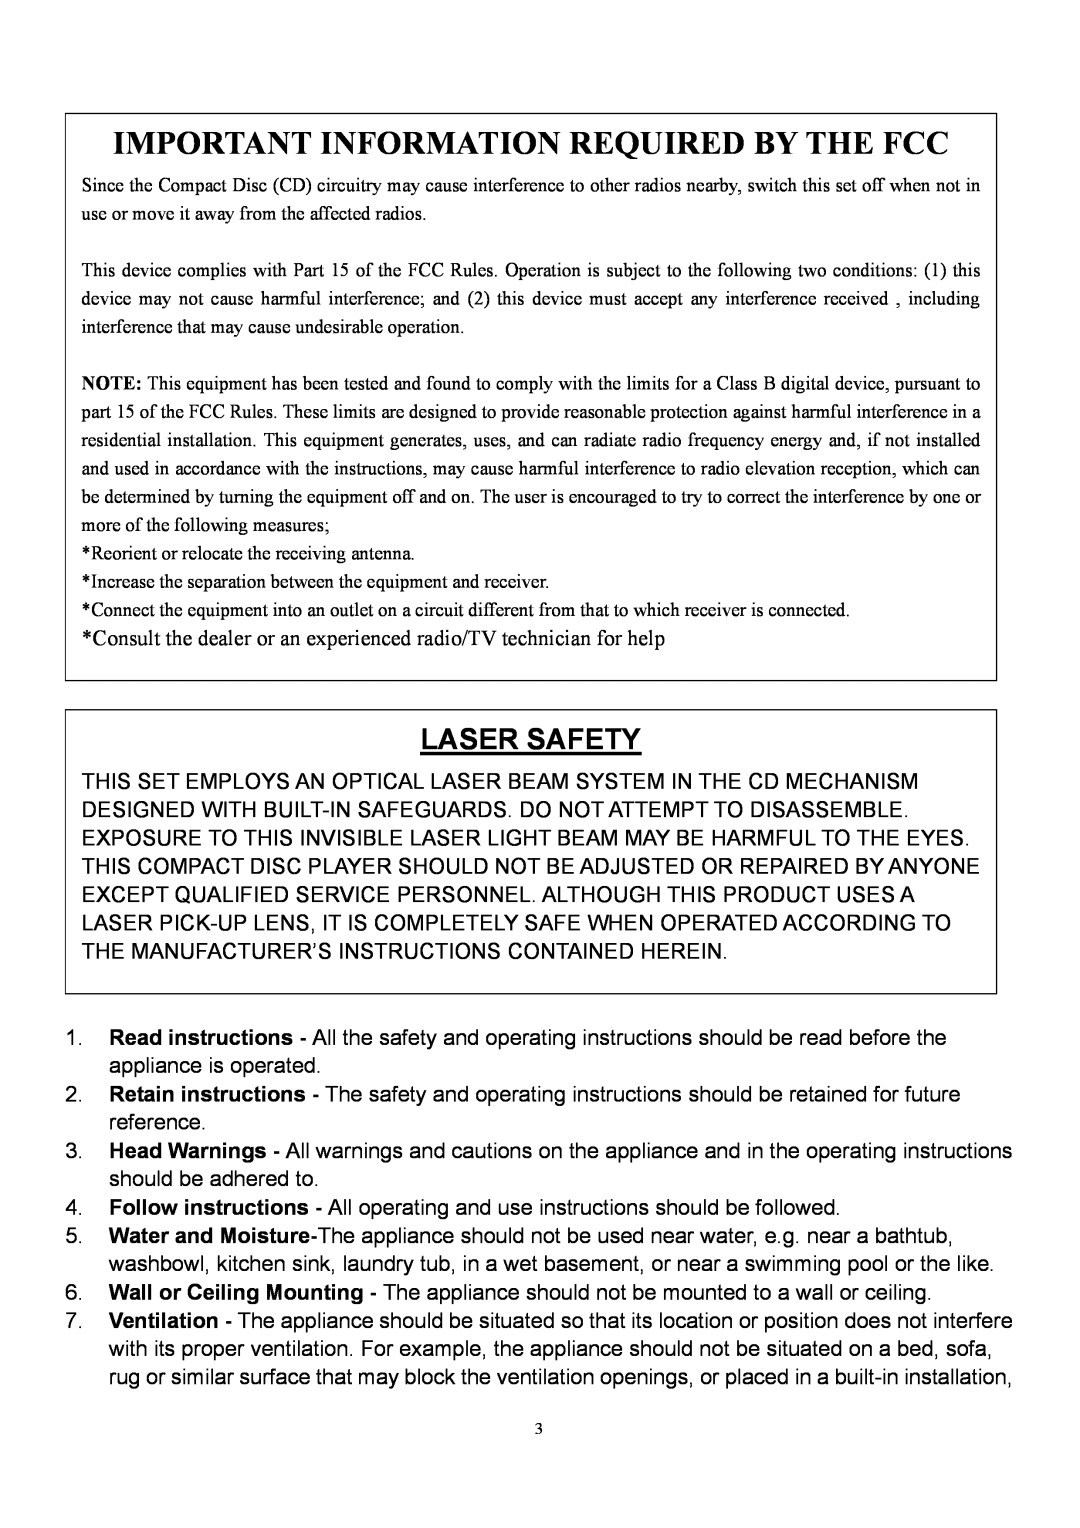 Curtis RCD544 instruction manual Important Information Required By The Fcc, Laser Safety 